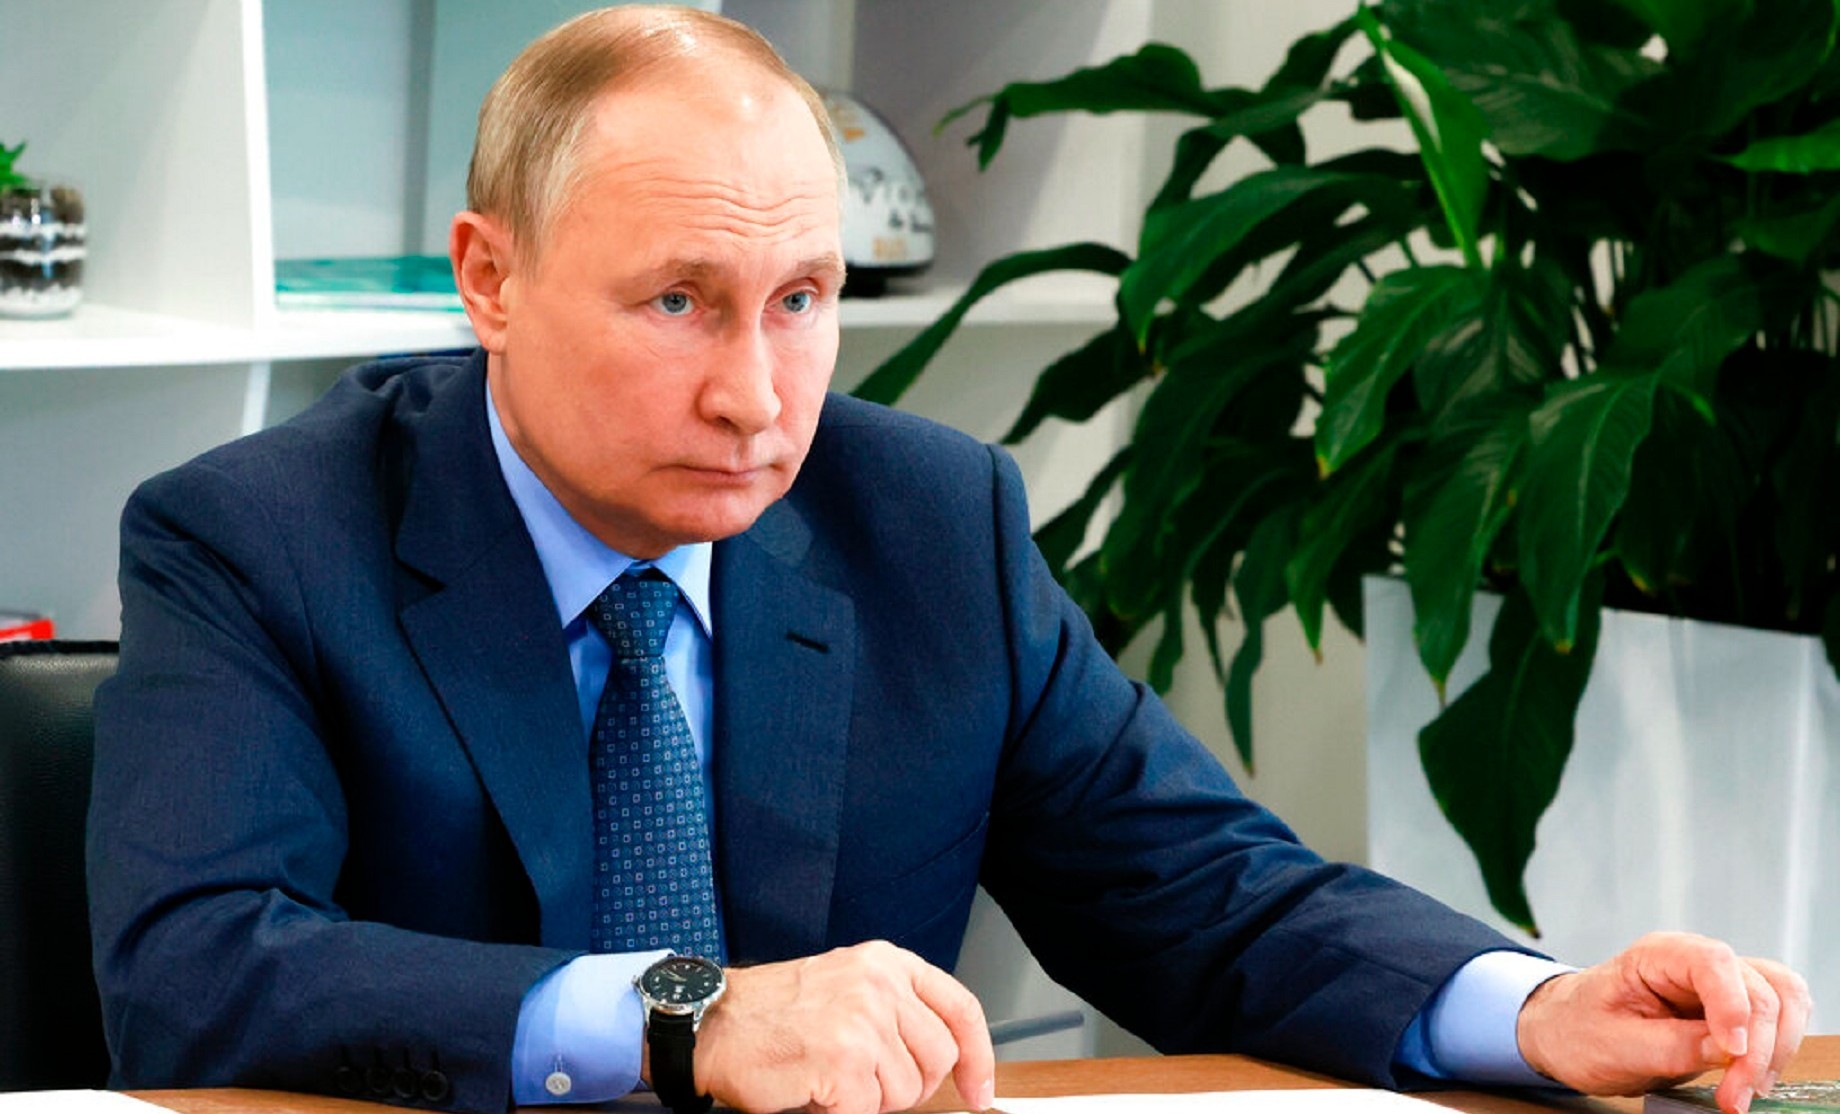 Rumors have been circulating for months that Vladimir Putin is ill